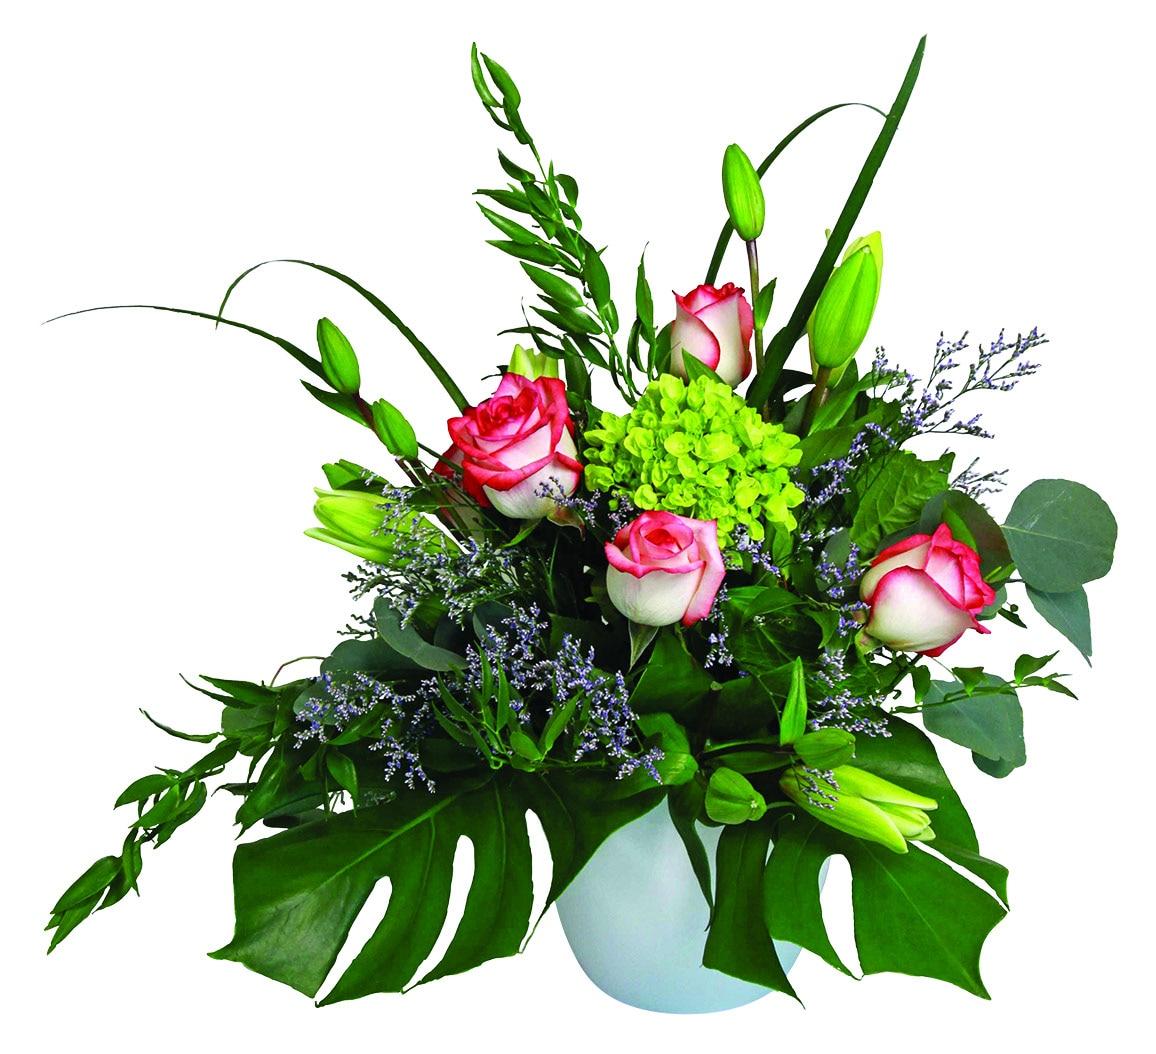 A fresh arrangement with red and white roses, green hydrangea, white lilies, greens and fillers.